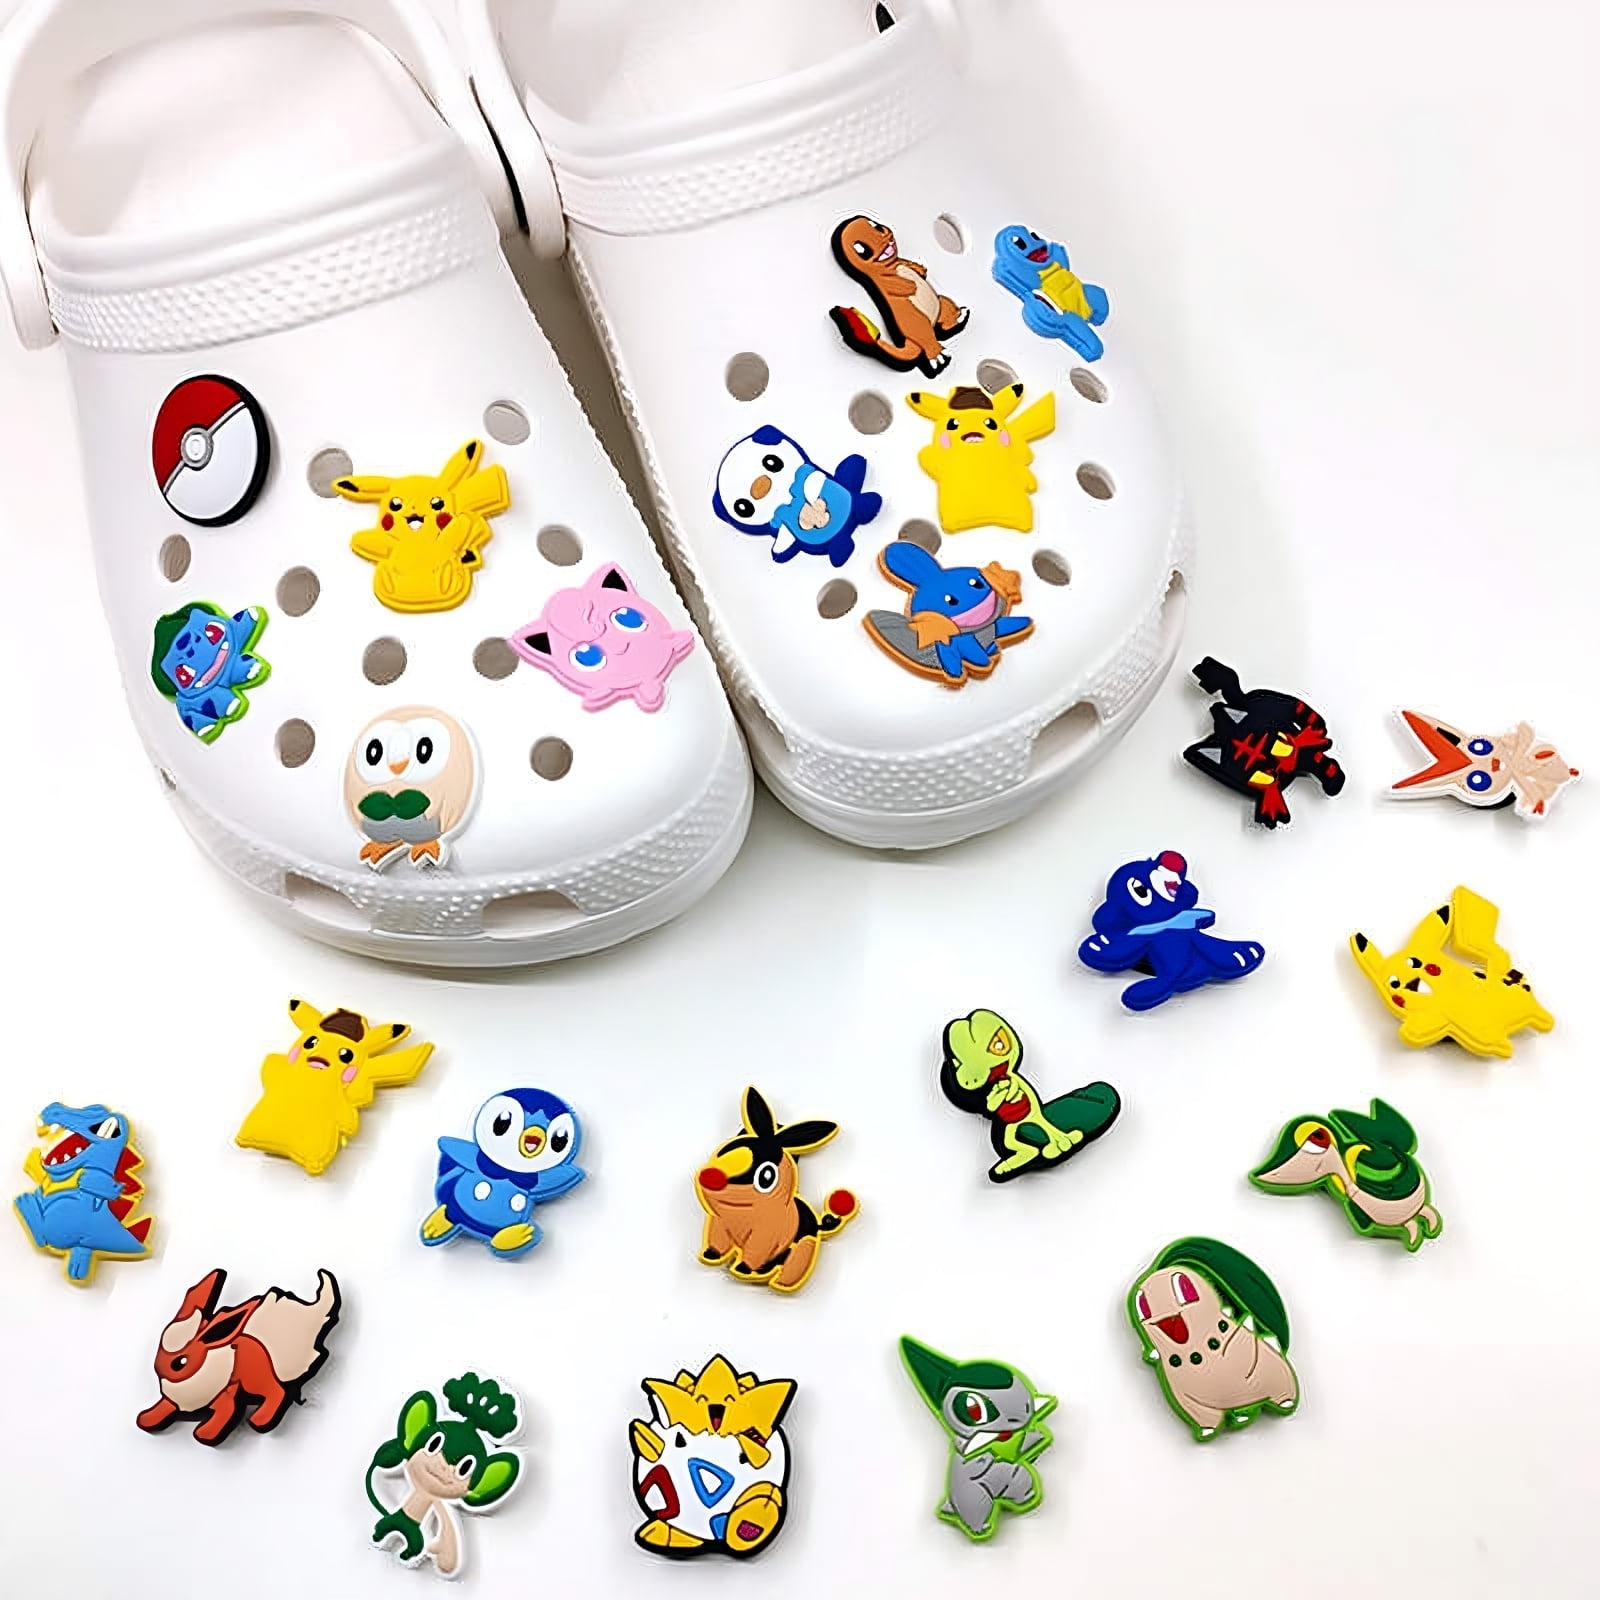 Pvc Anime Shoe Parts Accessories Decoration Charm Buckle Jibitz For Croc  Charms Cartoon Clog Buttons From Lightingtop, $0.17